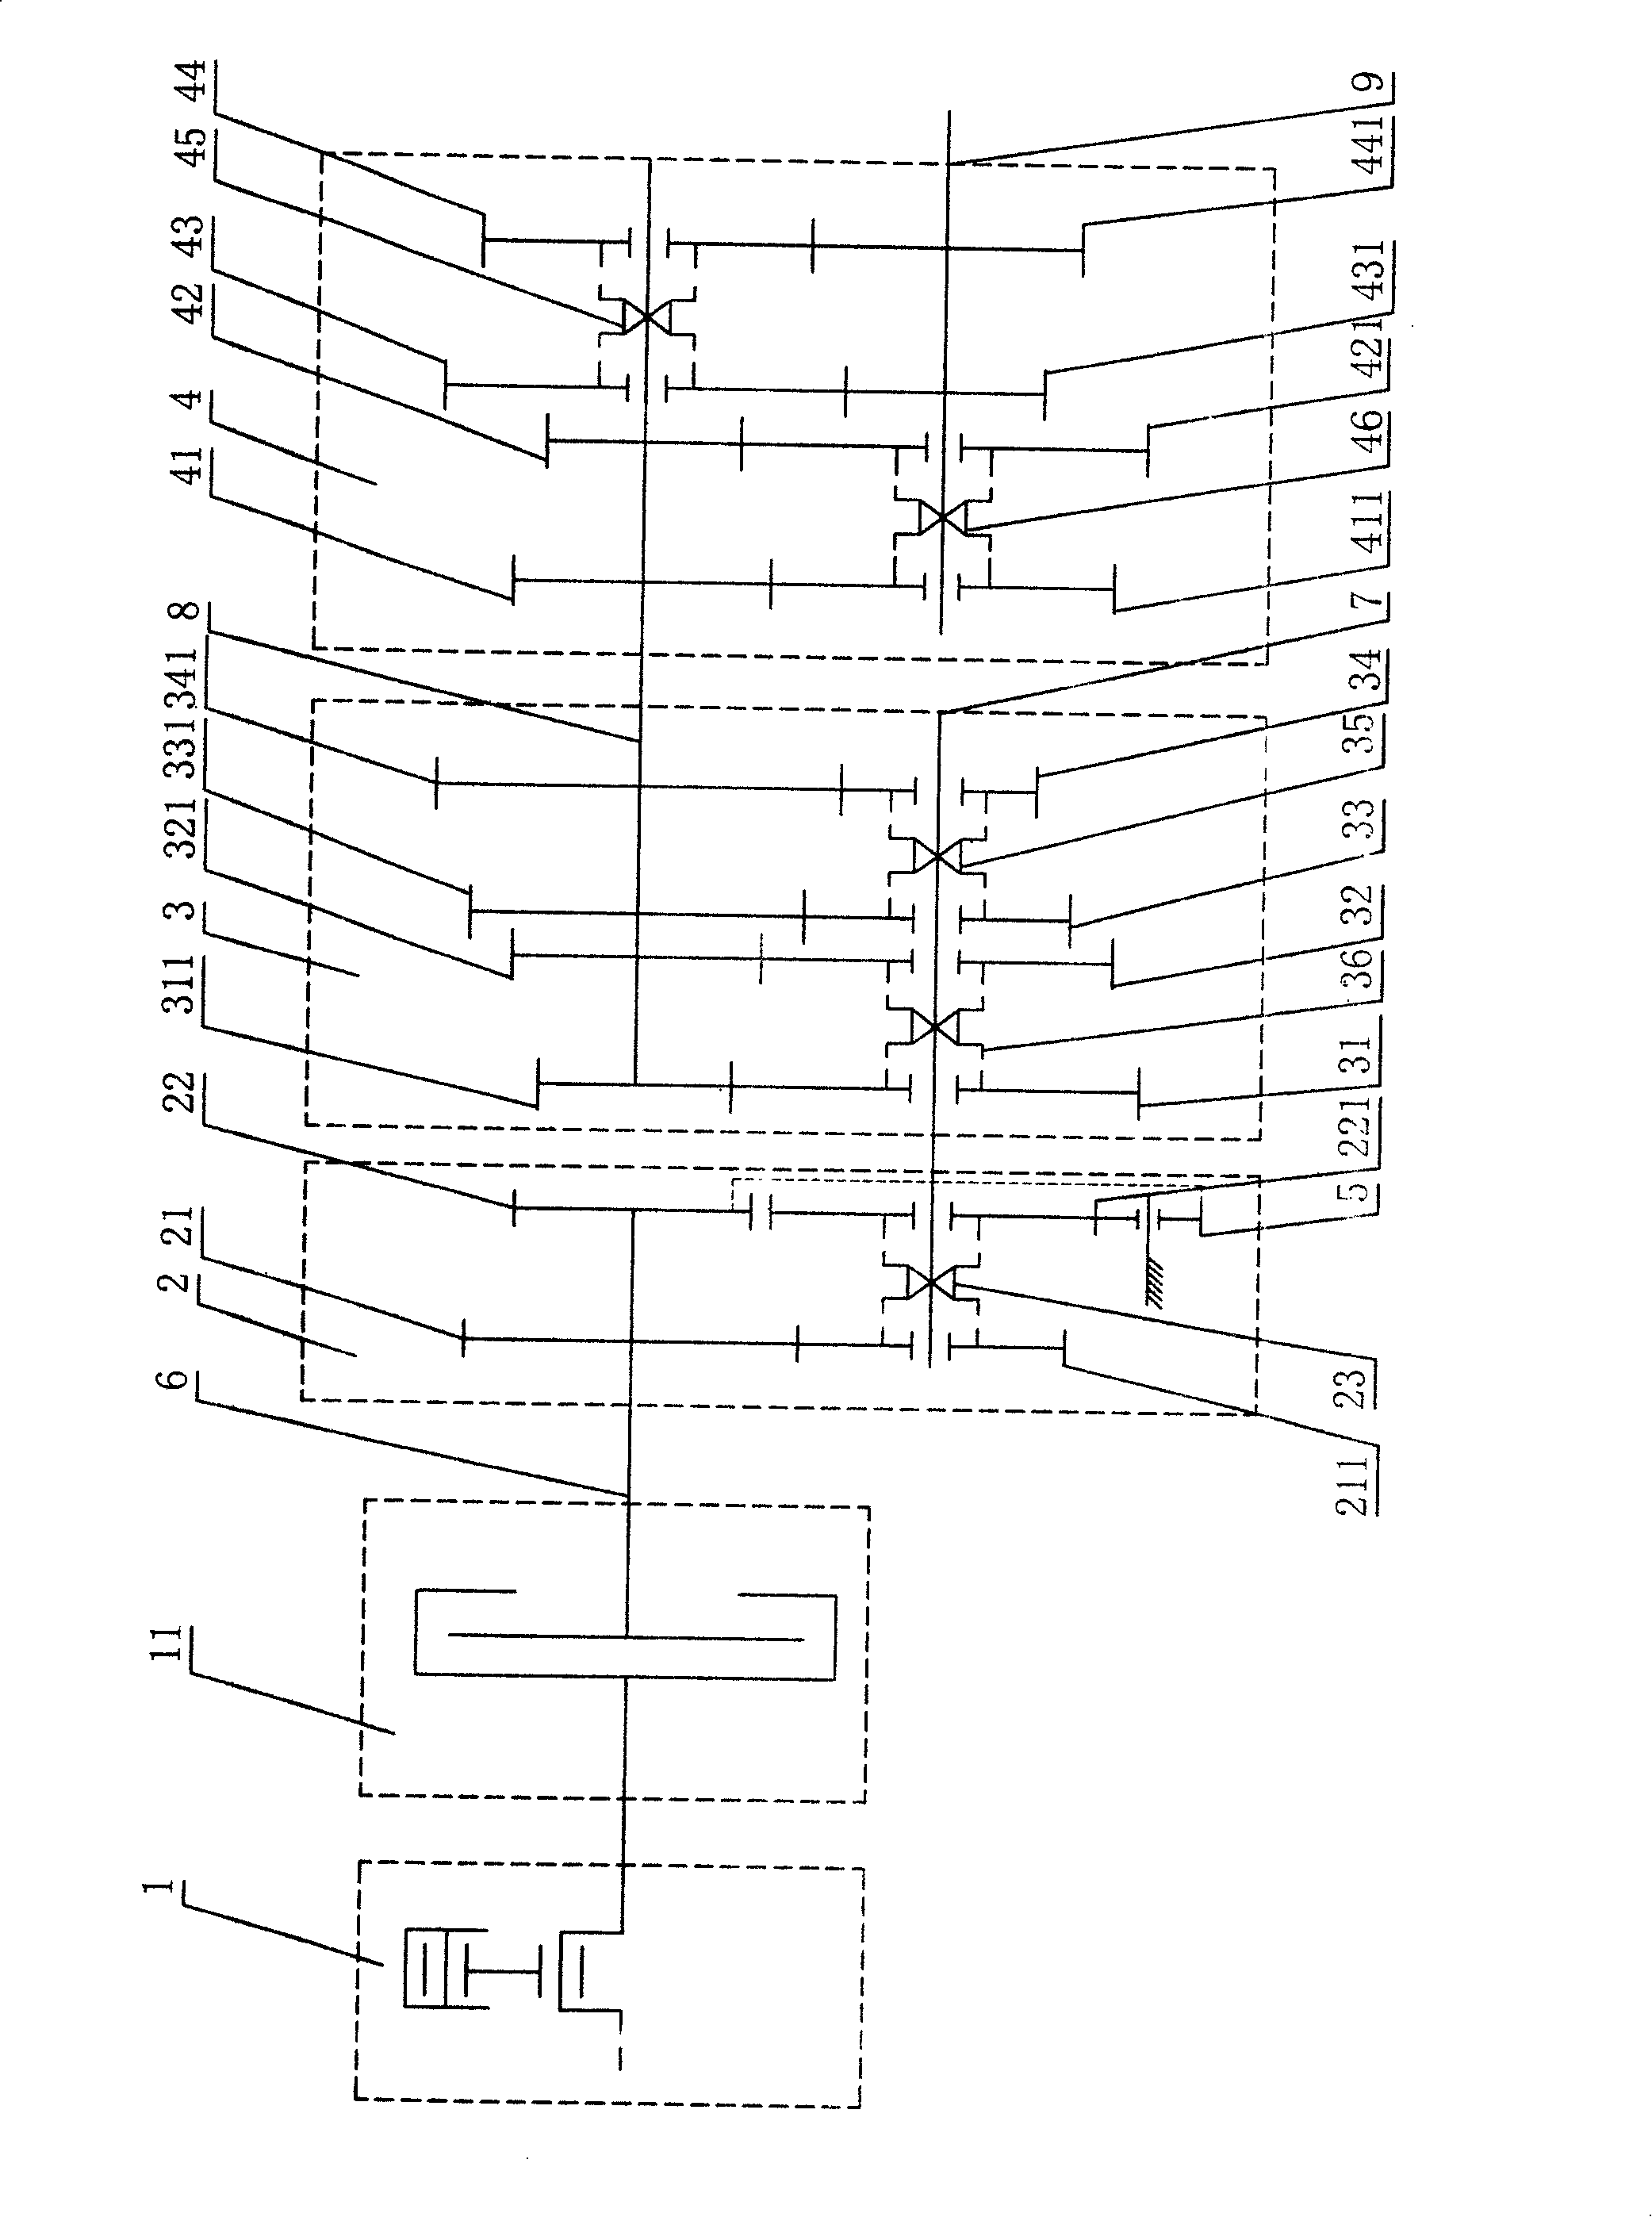 Multi-stage transmission device of tractor